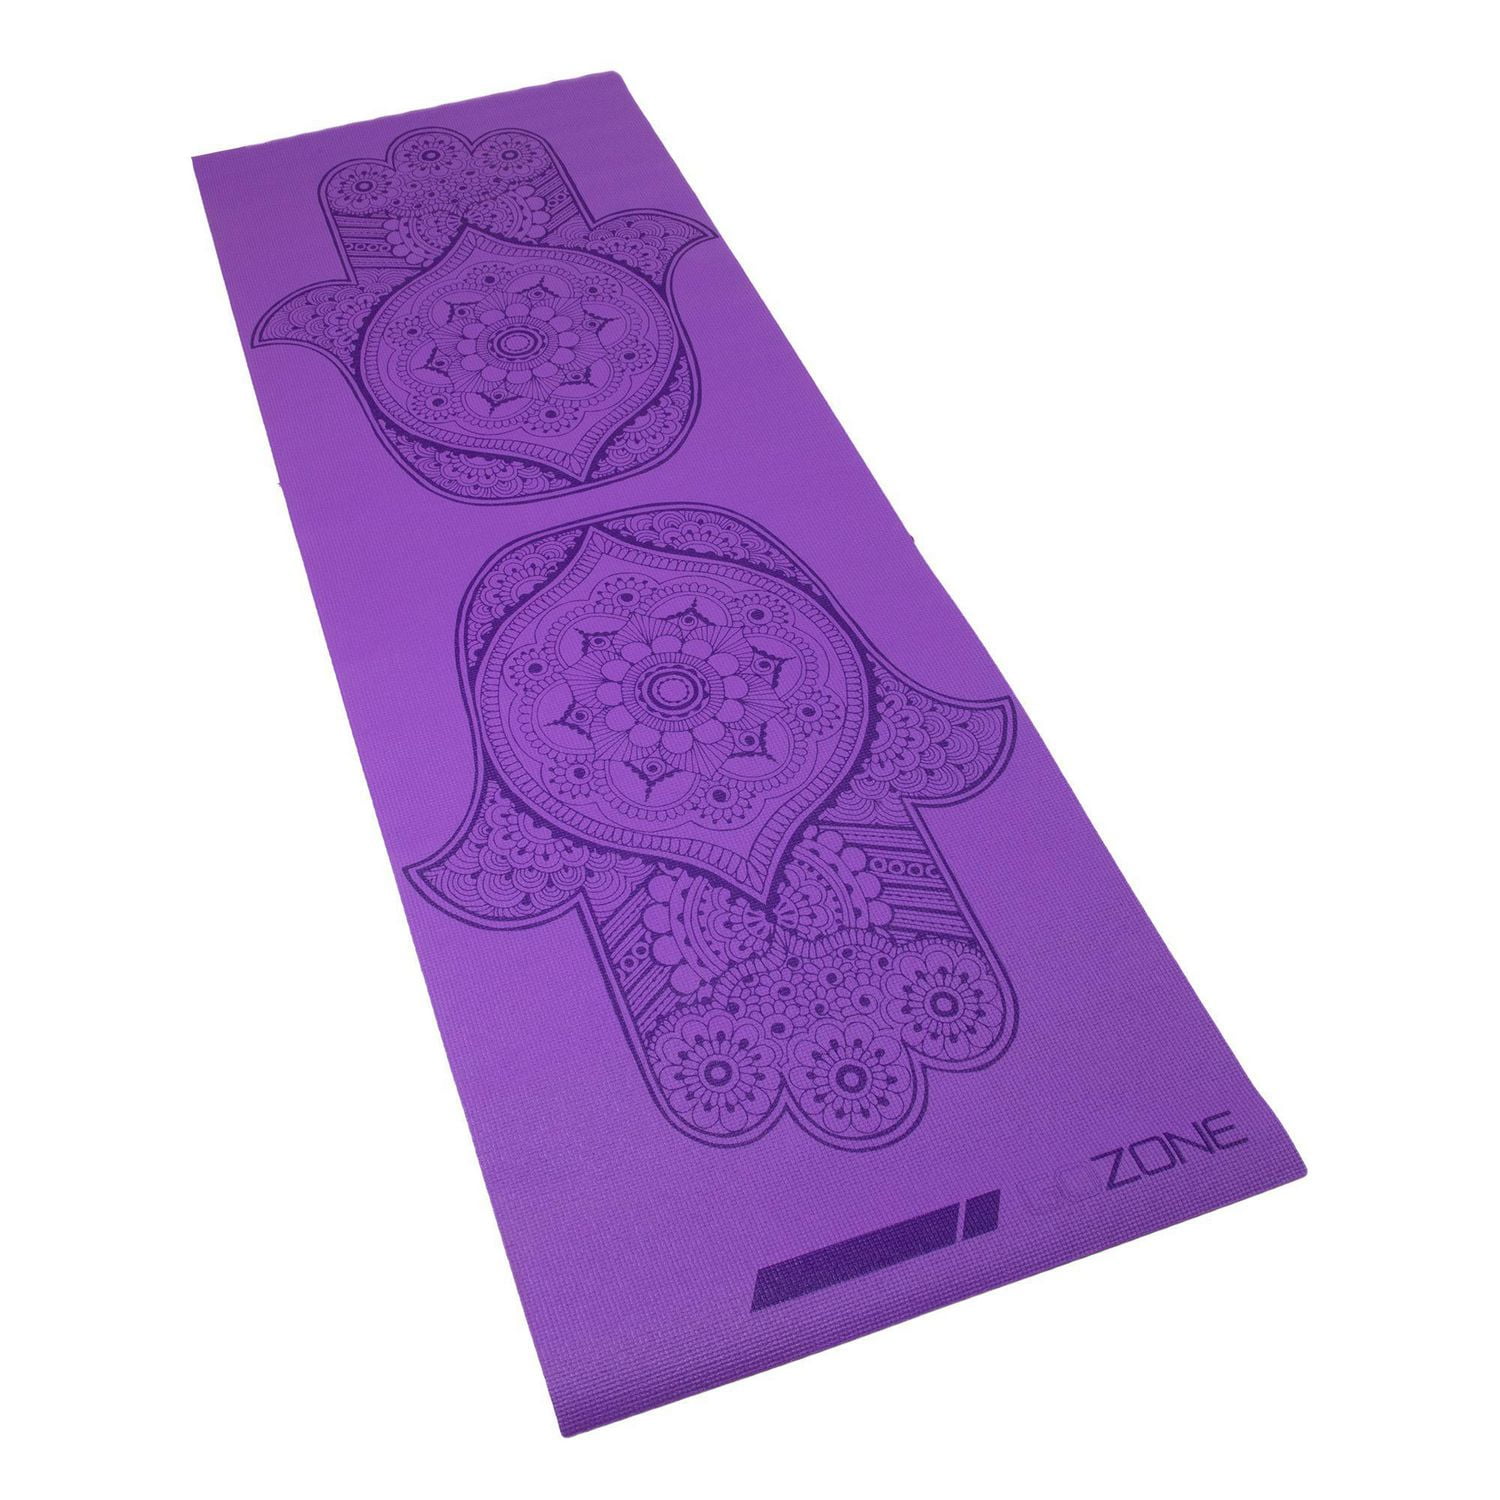 GoZone Printed Foldable Yoga Mat – Purple, Durable and lightweight